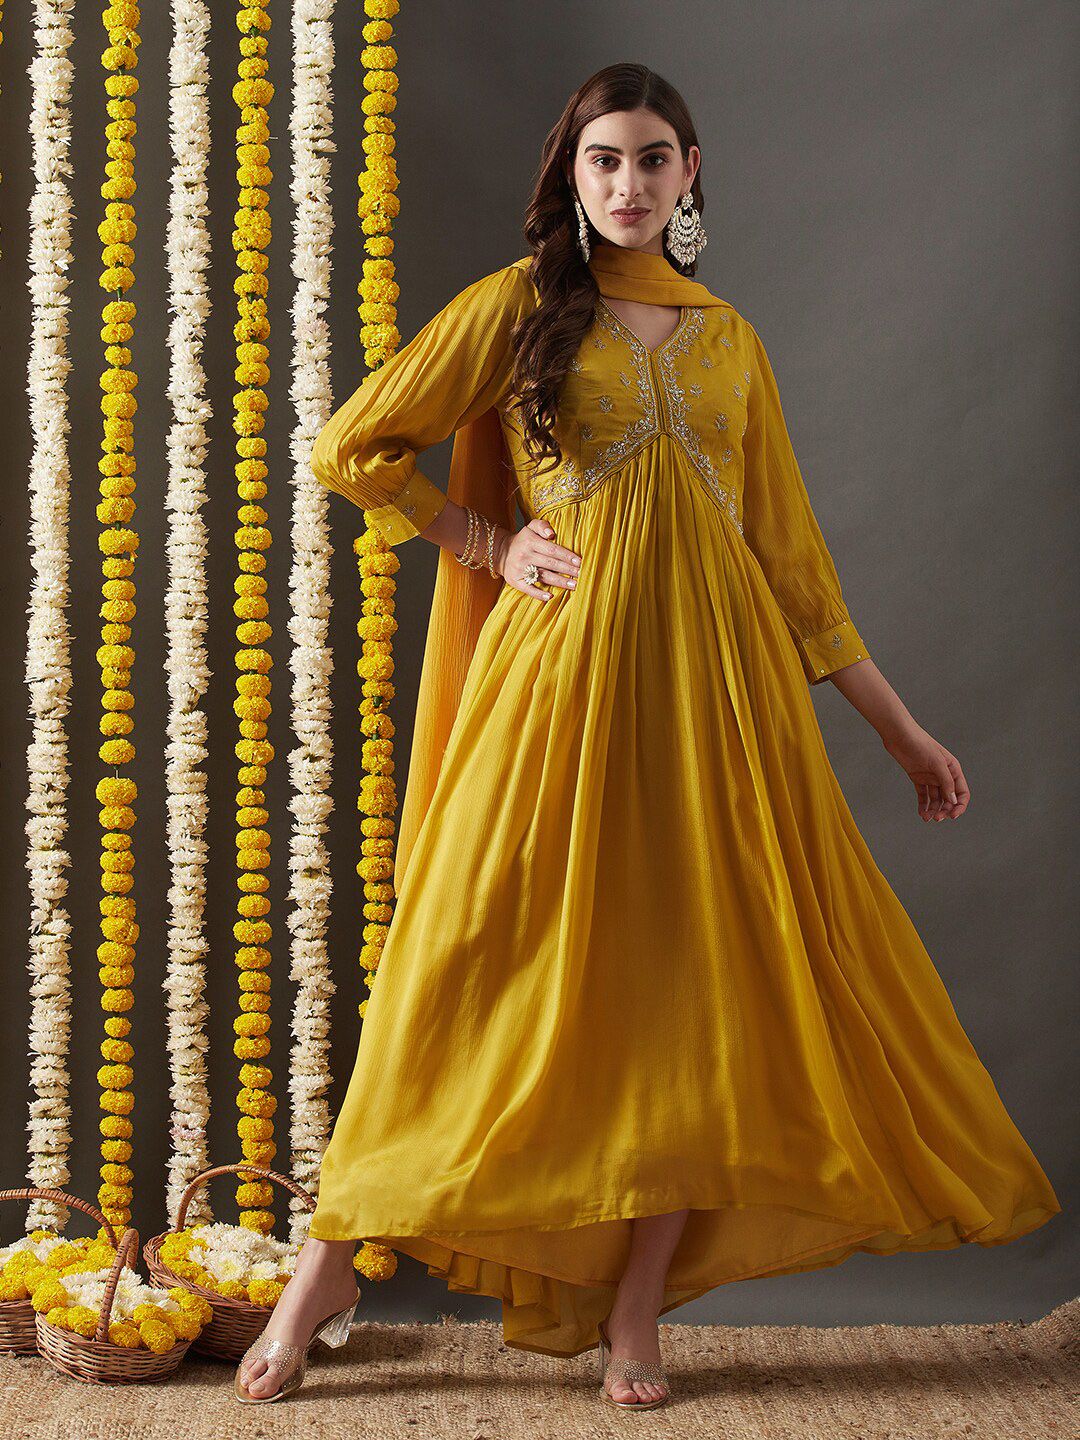 FASHOR Yellow Ethnic Motifs Bishop Sleeve Crepe A-Line Maxi Dress Price in India